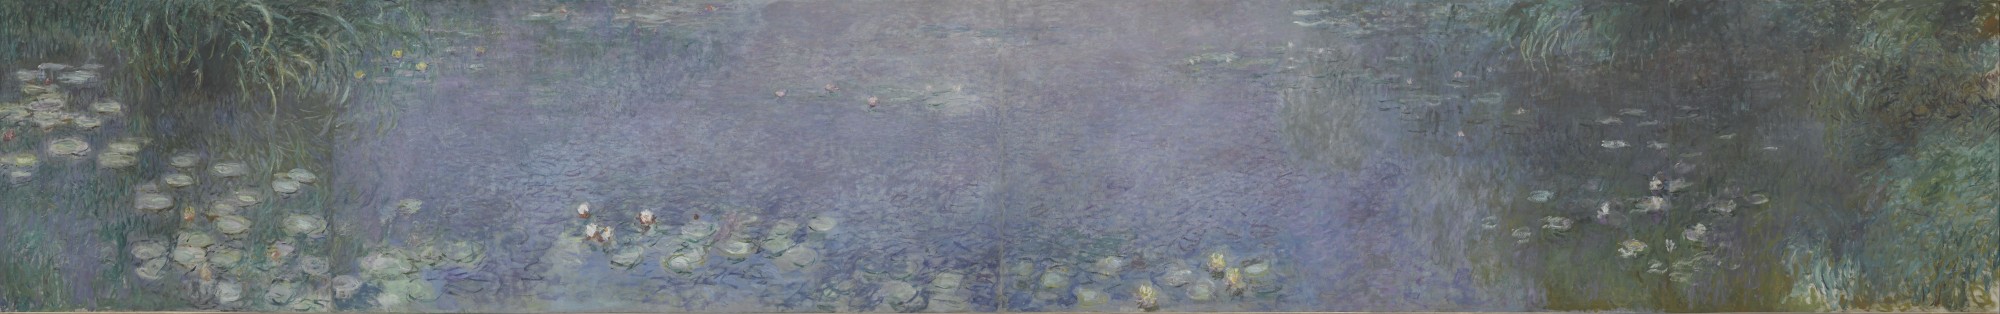 Claude Monet - The Water Lilies - Morning - Google Art Project